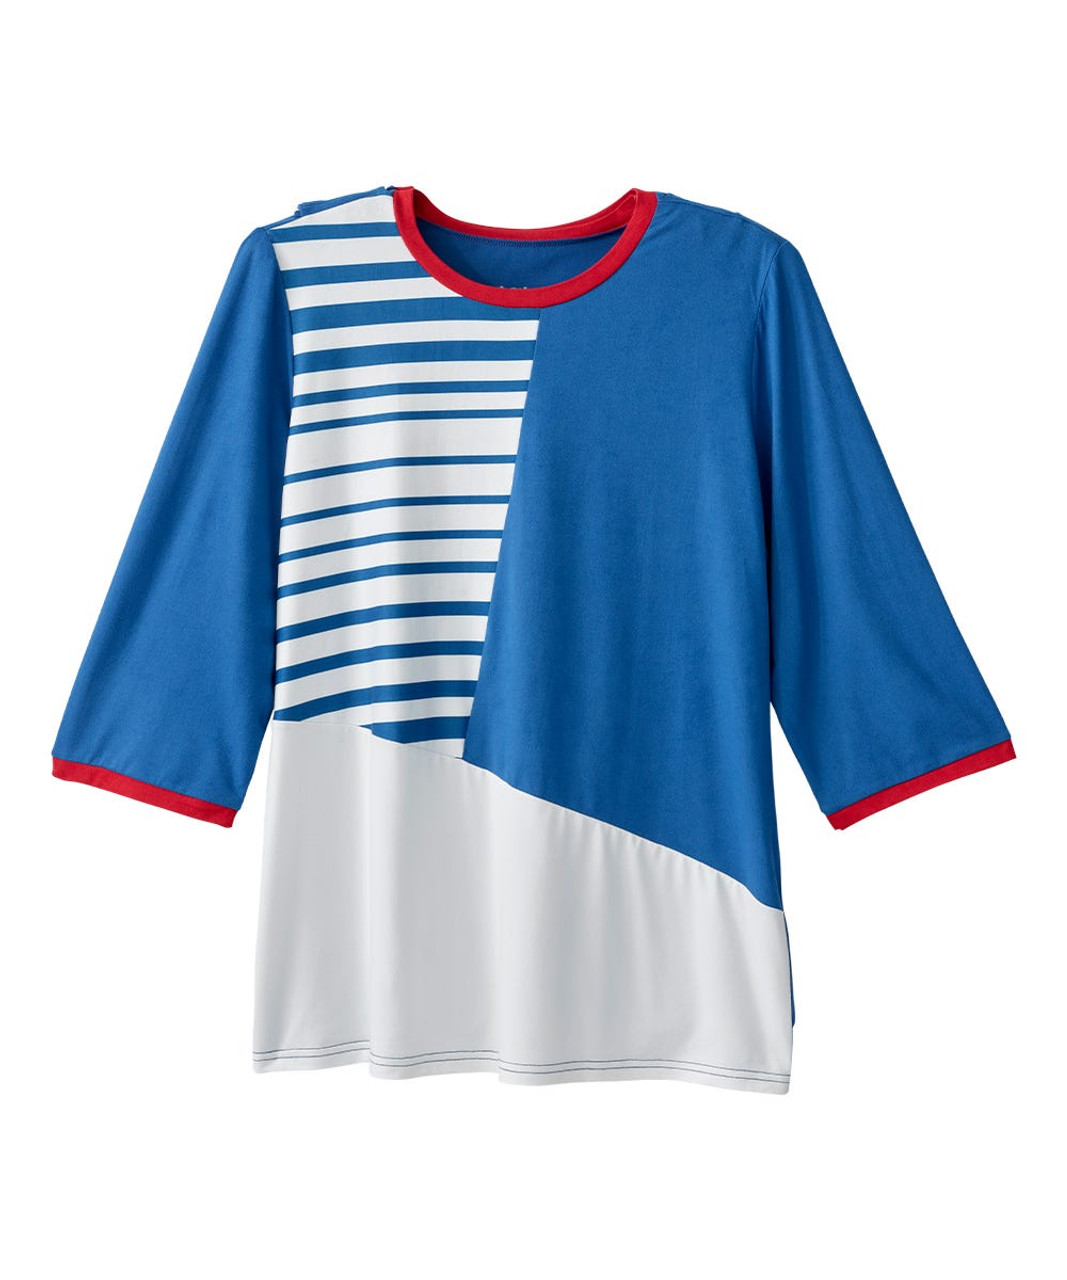 Silverts SV140 Top Color Block Open Back Electric Blue/Red/White, Size=M, SV140-SV2008-M